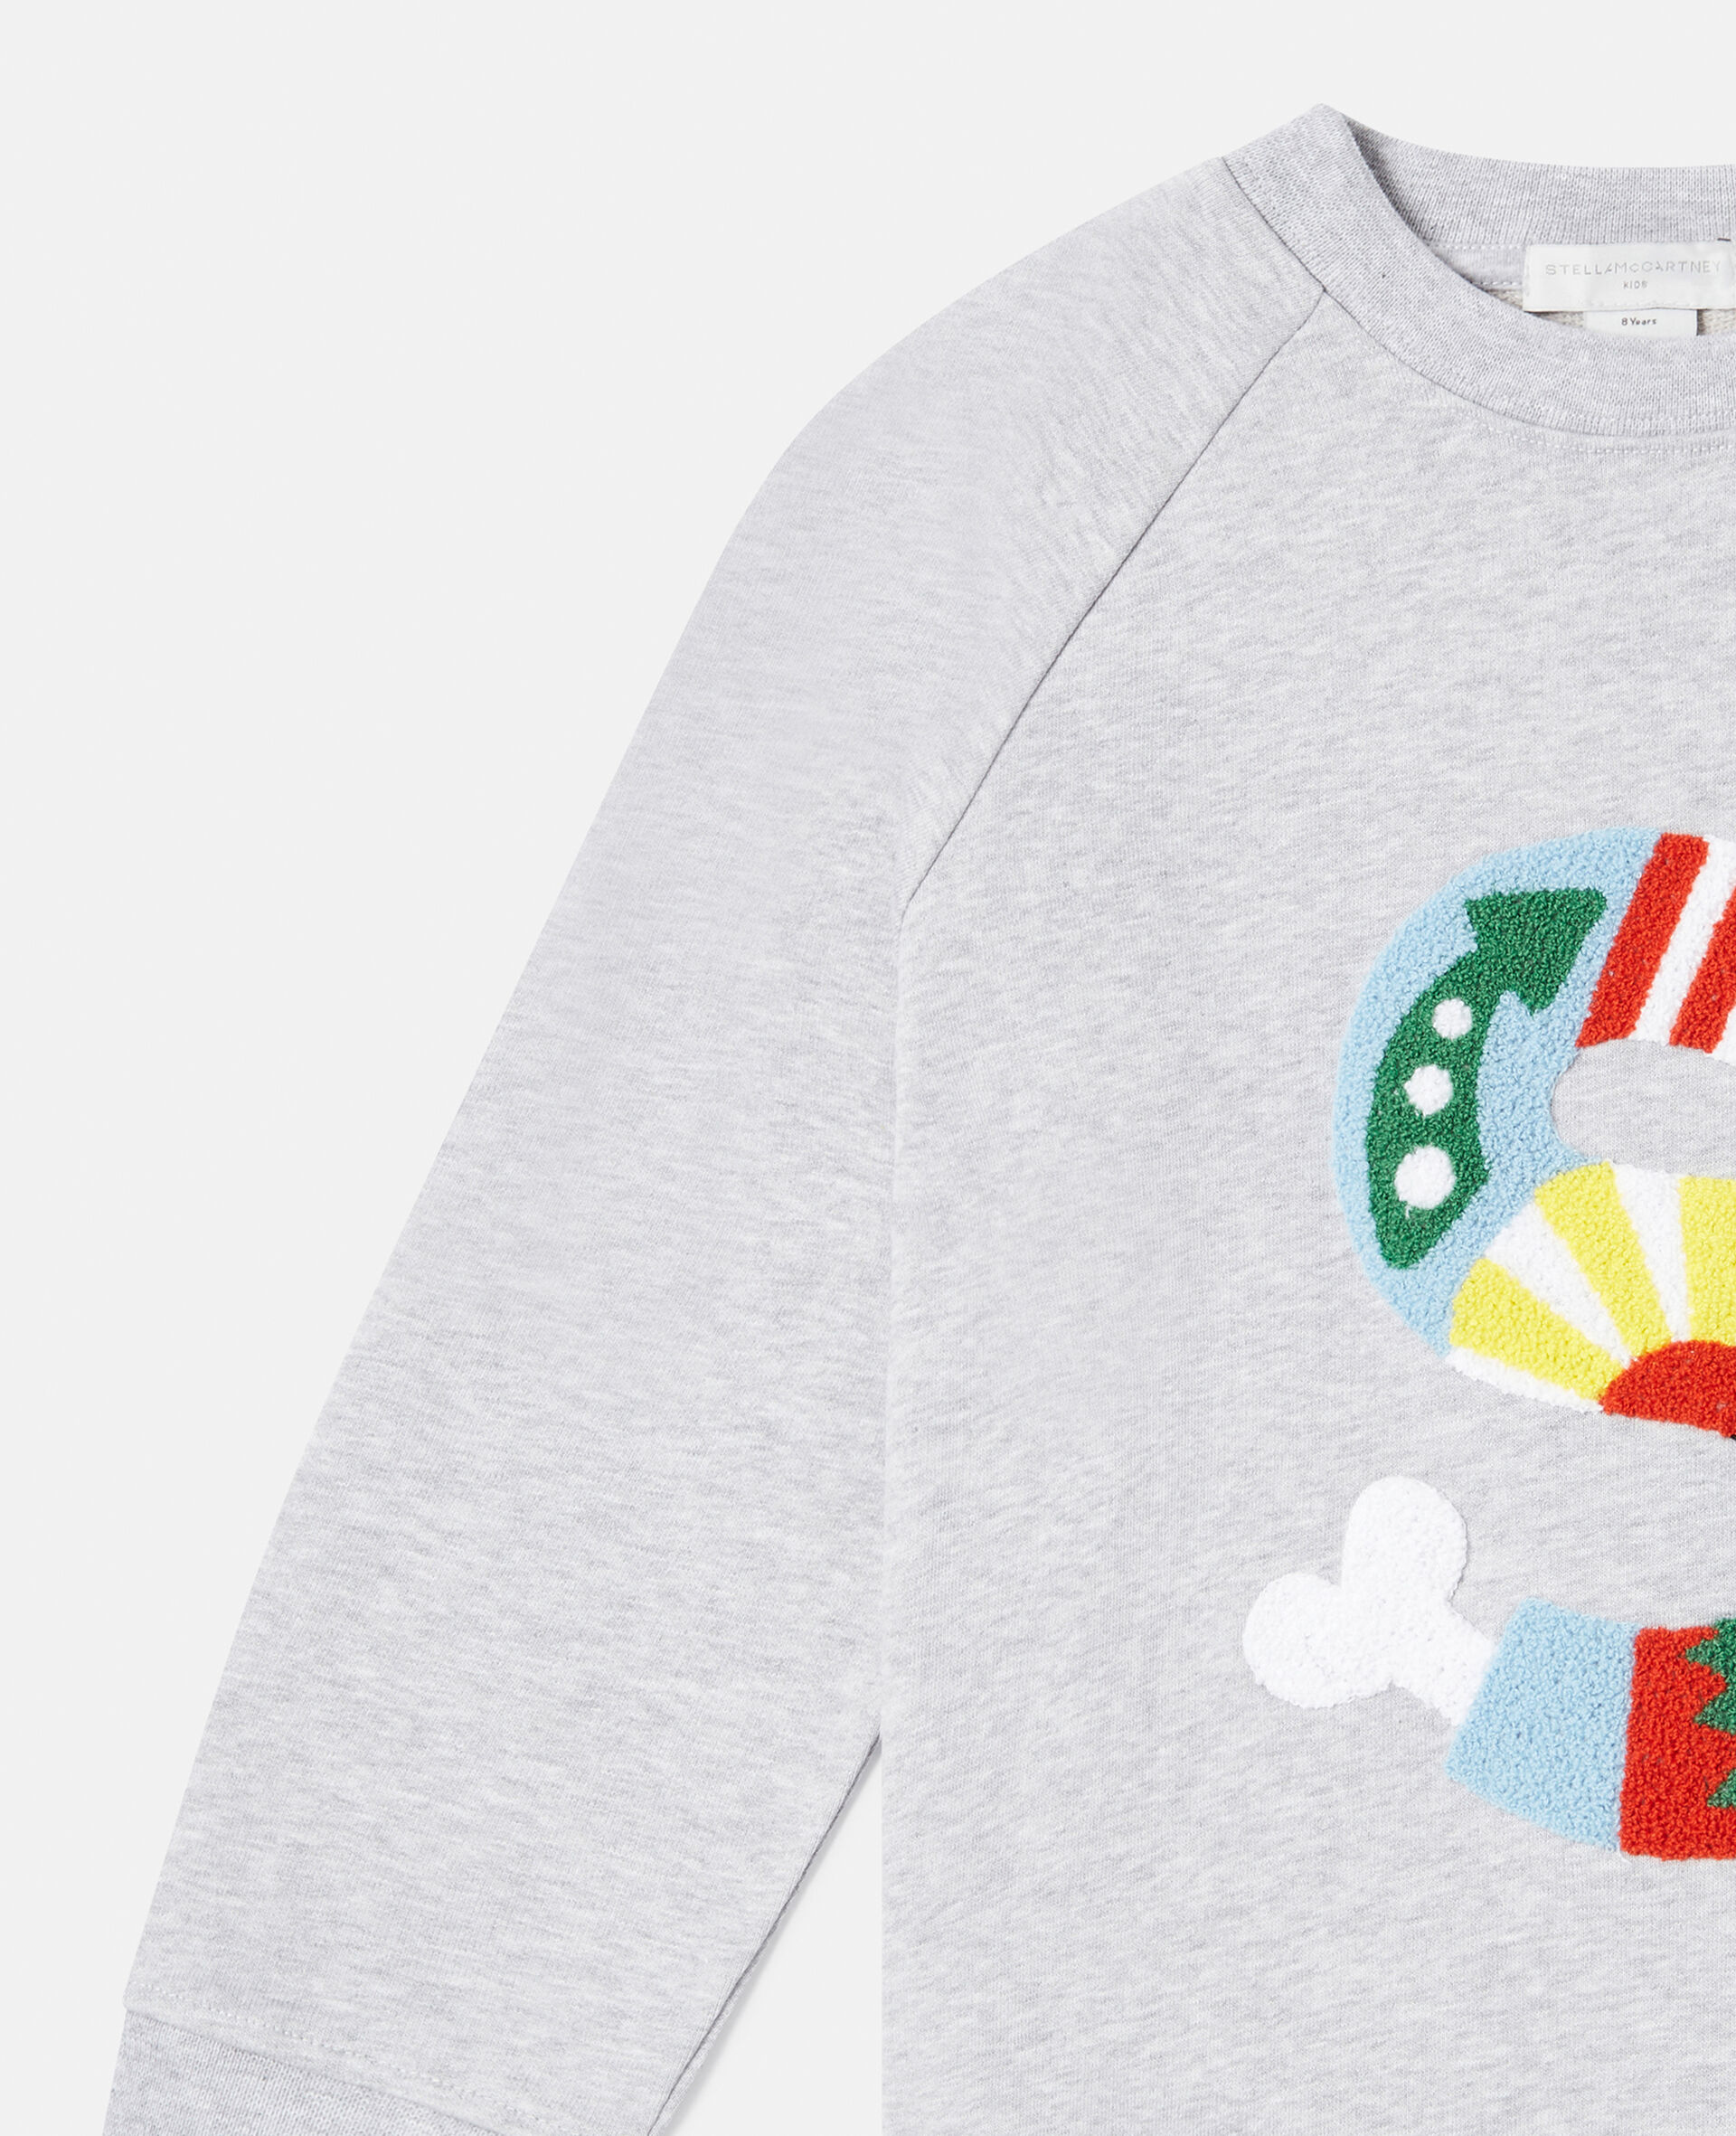 'S' Patchwork Embroidery Sweatshirt-Grey-large image number 1